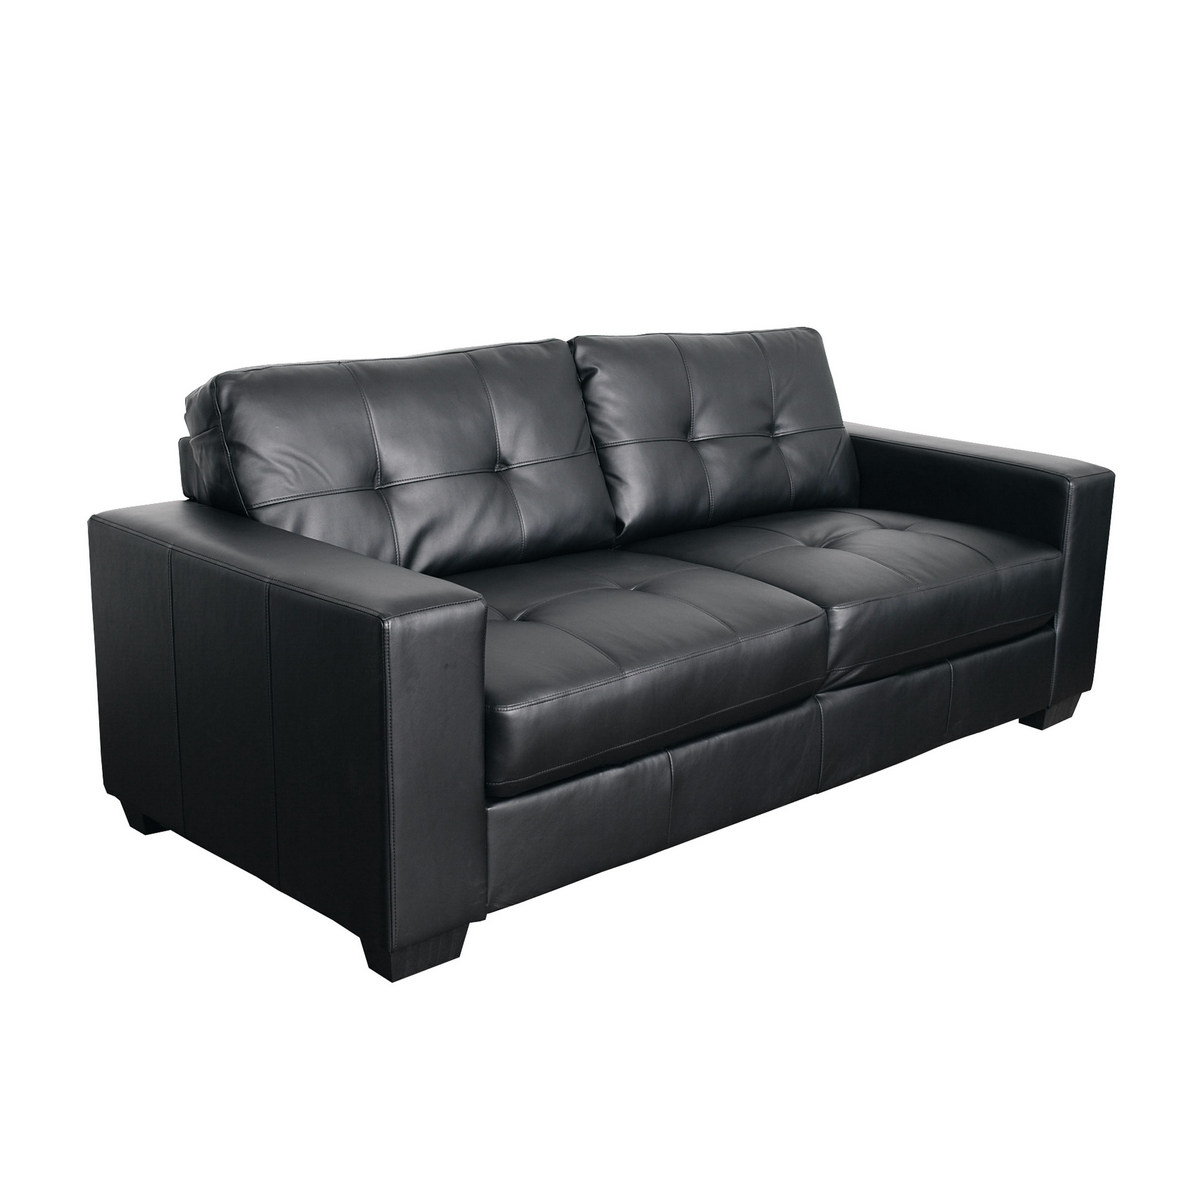 Corliving Lzy-101-s Club Tufted Black Bonded Leather Sofa